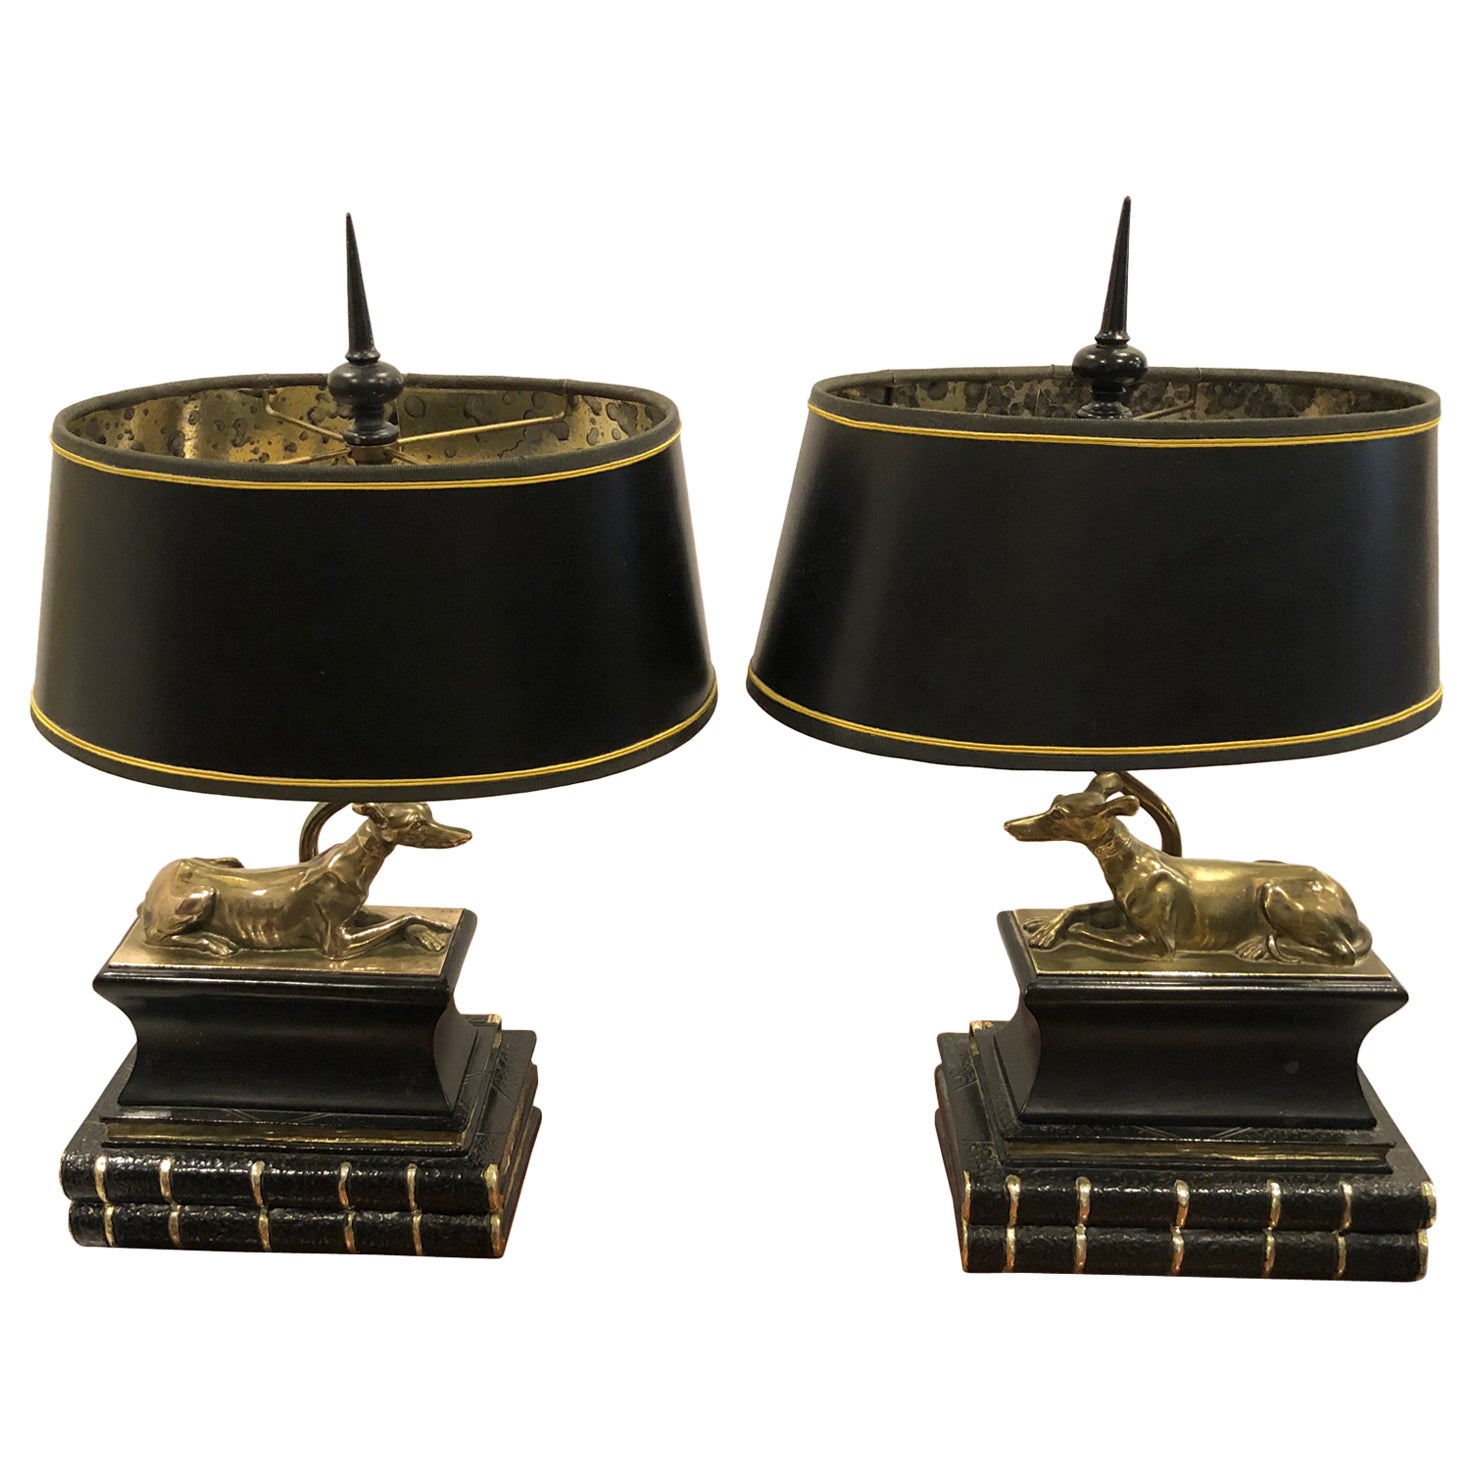 Pair of Marvelous Brass Greyhound Dog Table Lamps Resting on Leather Books